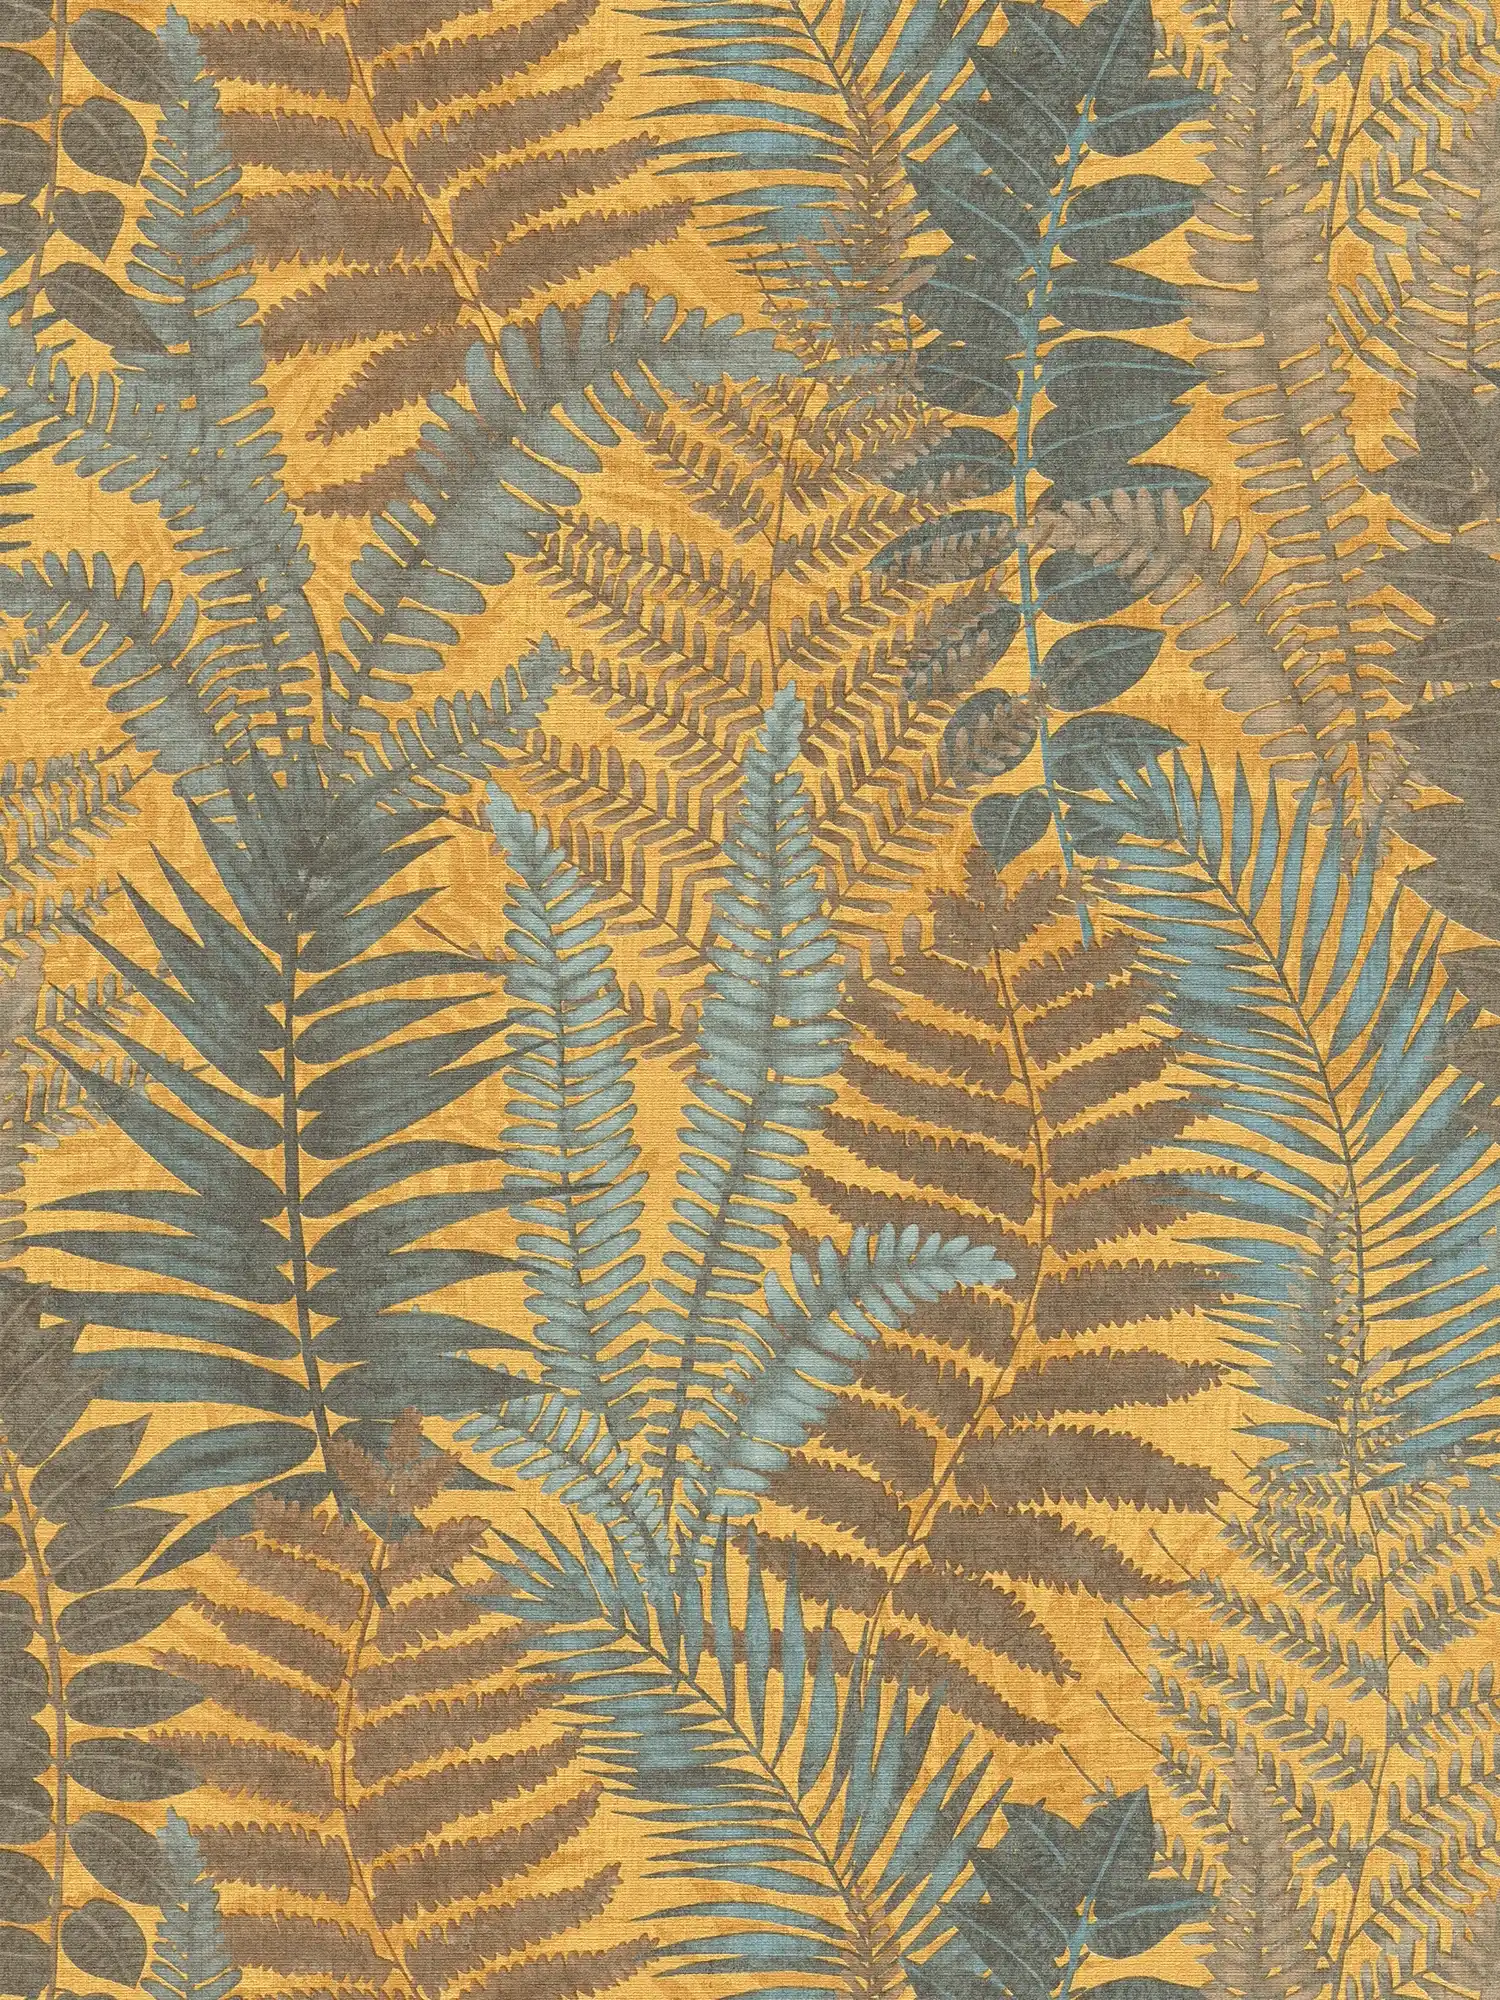 Floral style wallpaper with fern leaves lightly textured, matt - yellow, blue, brown
